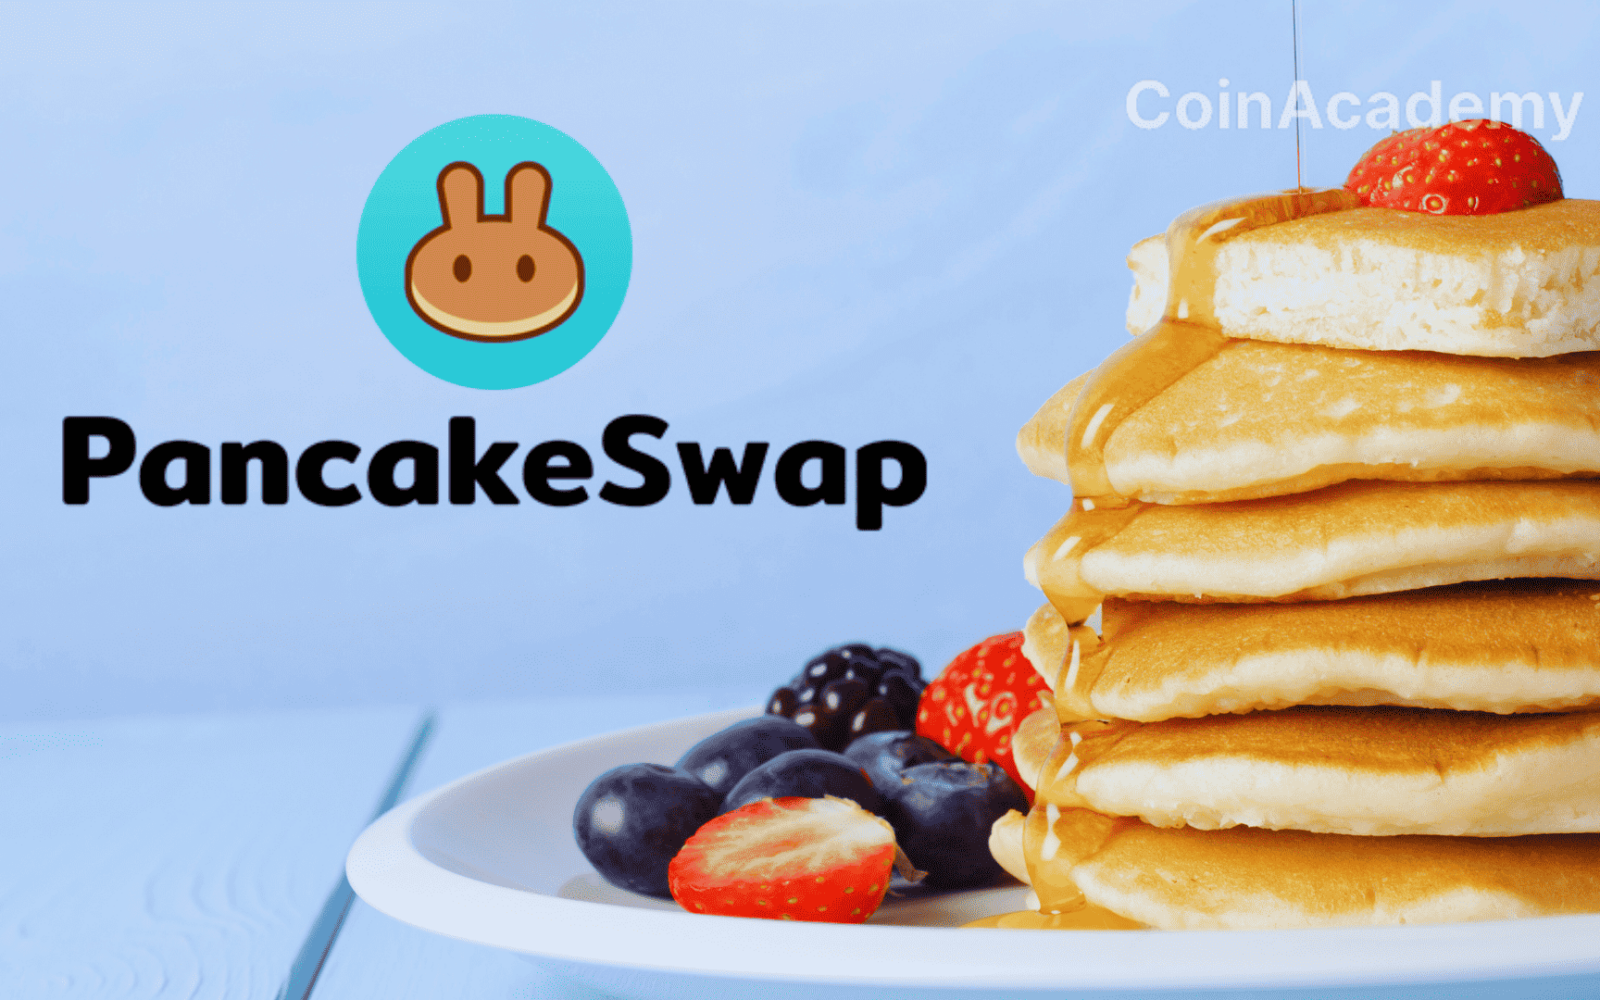 pancakeswap cake offre totale